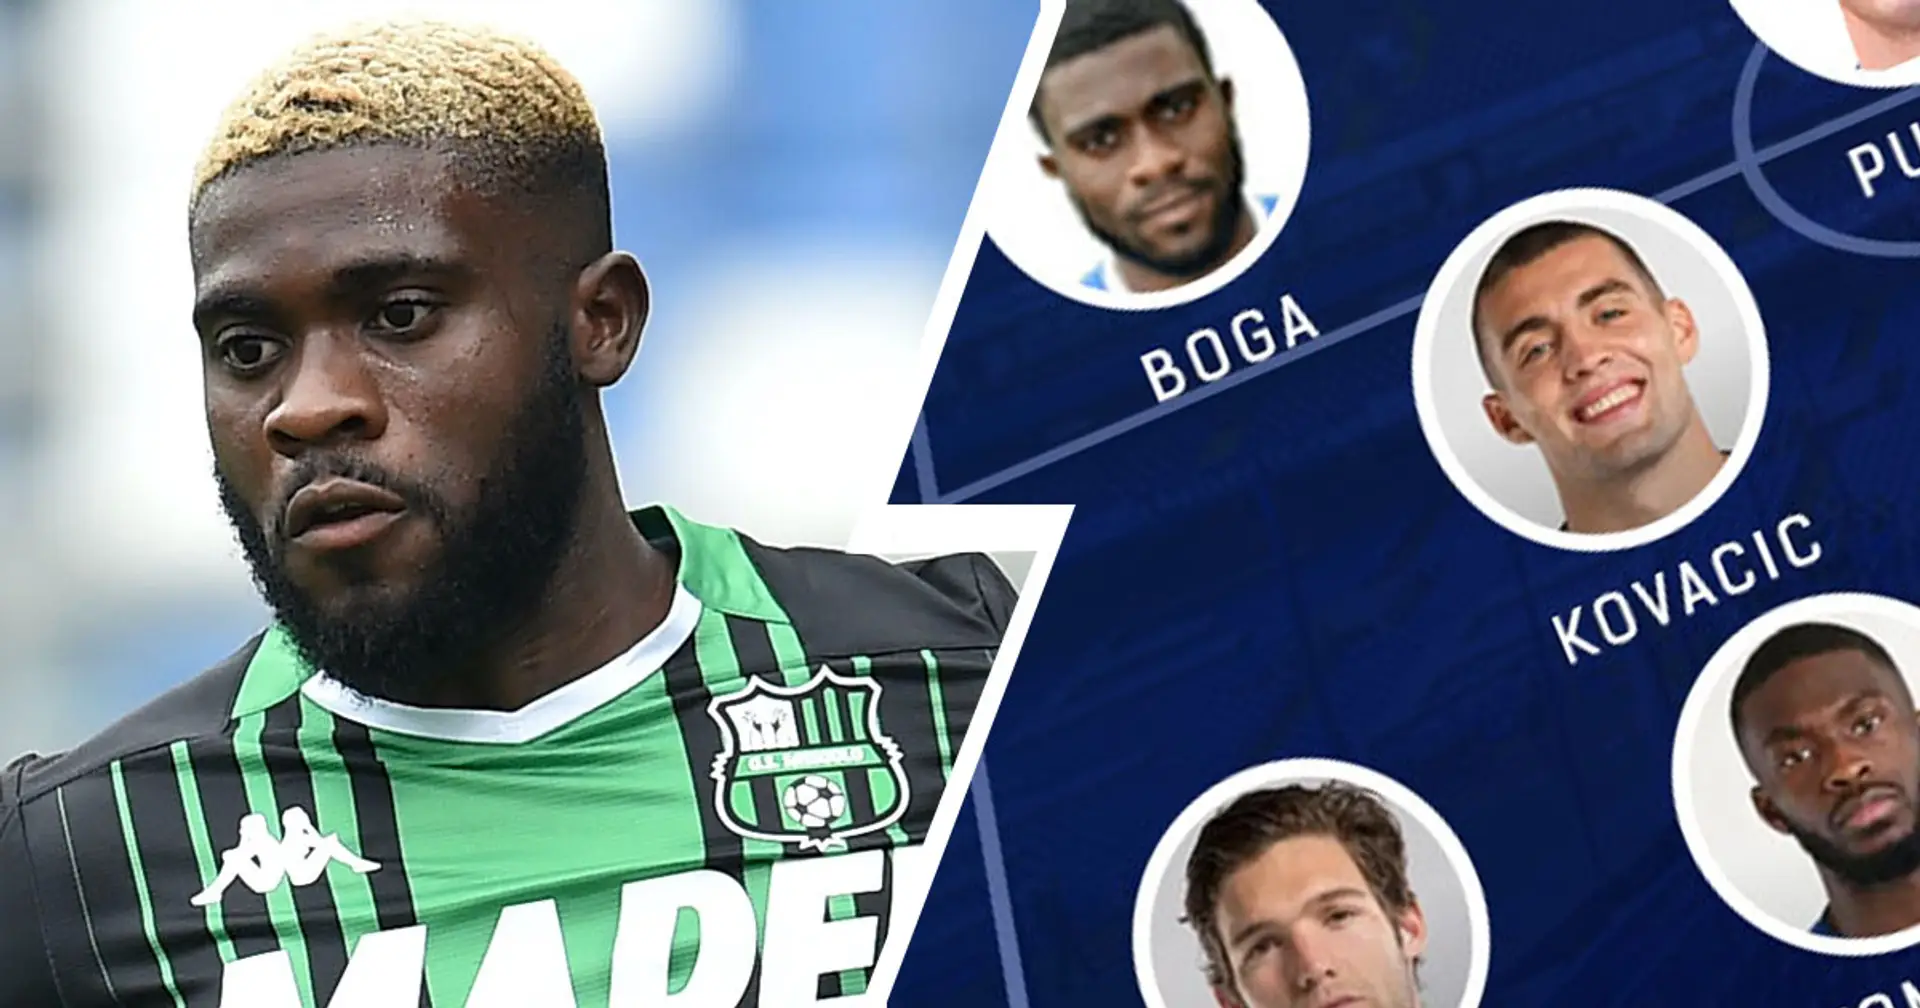 Time for a return? 3 ways Chelsea could line up with Jeremie Boga next season